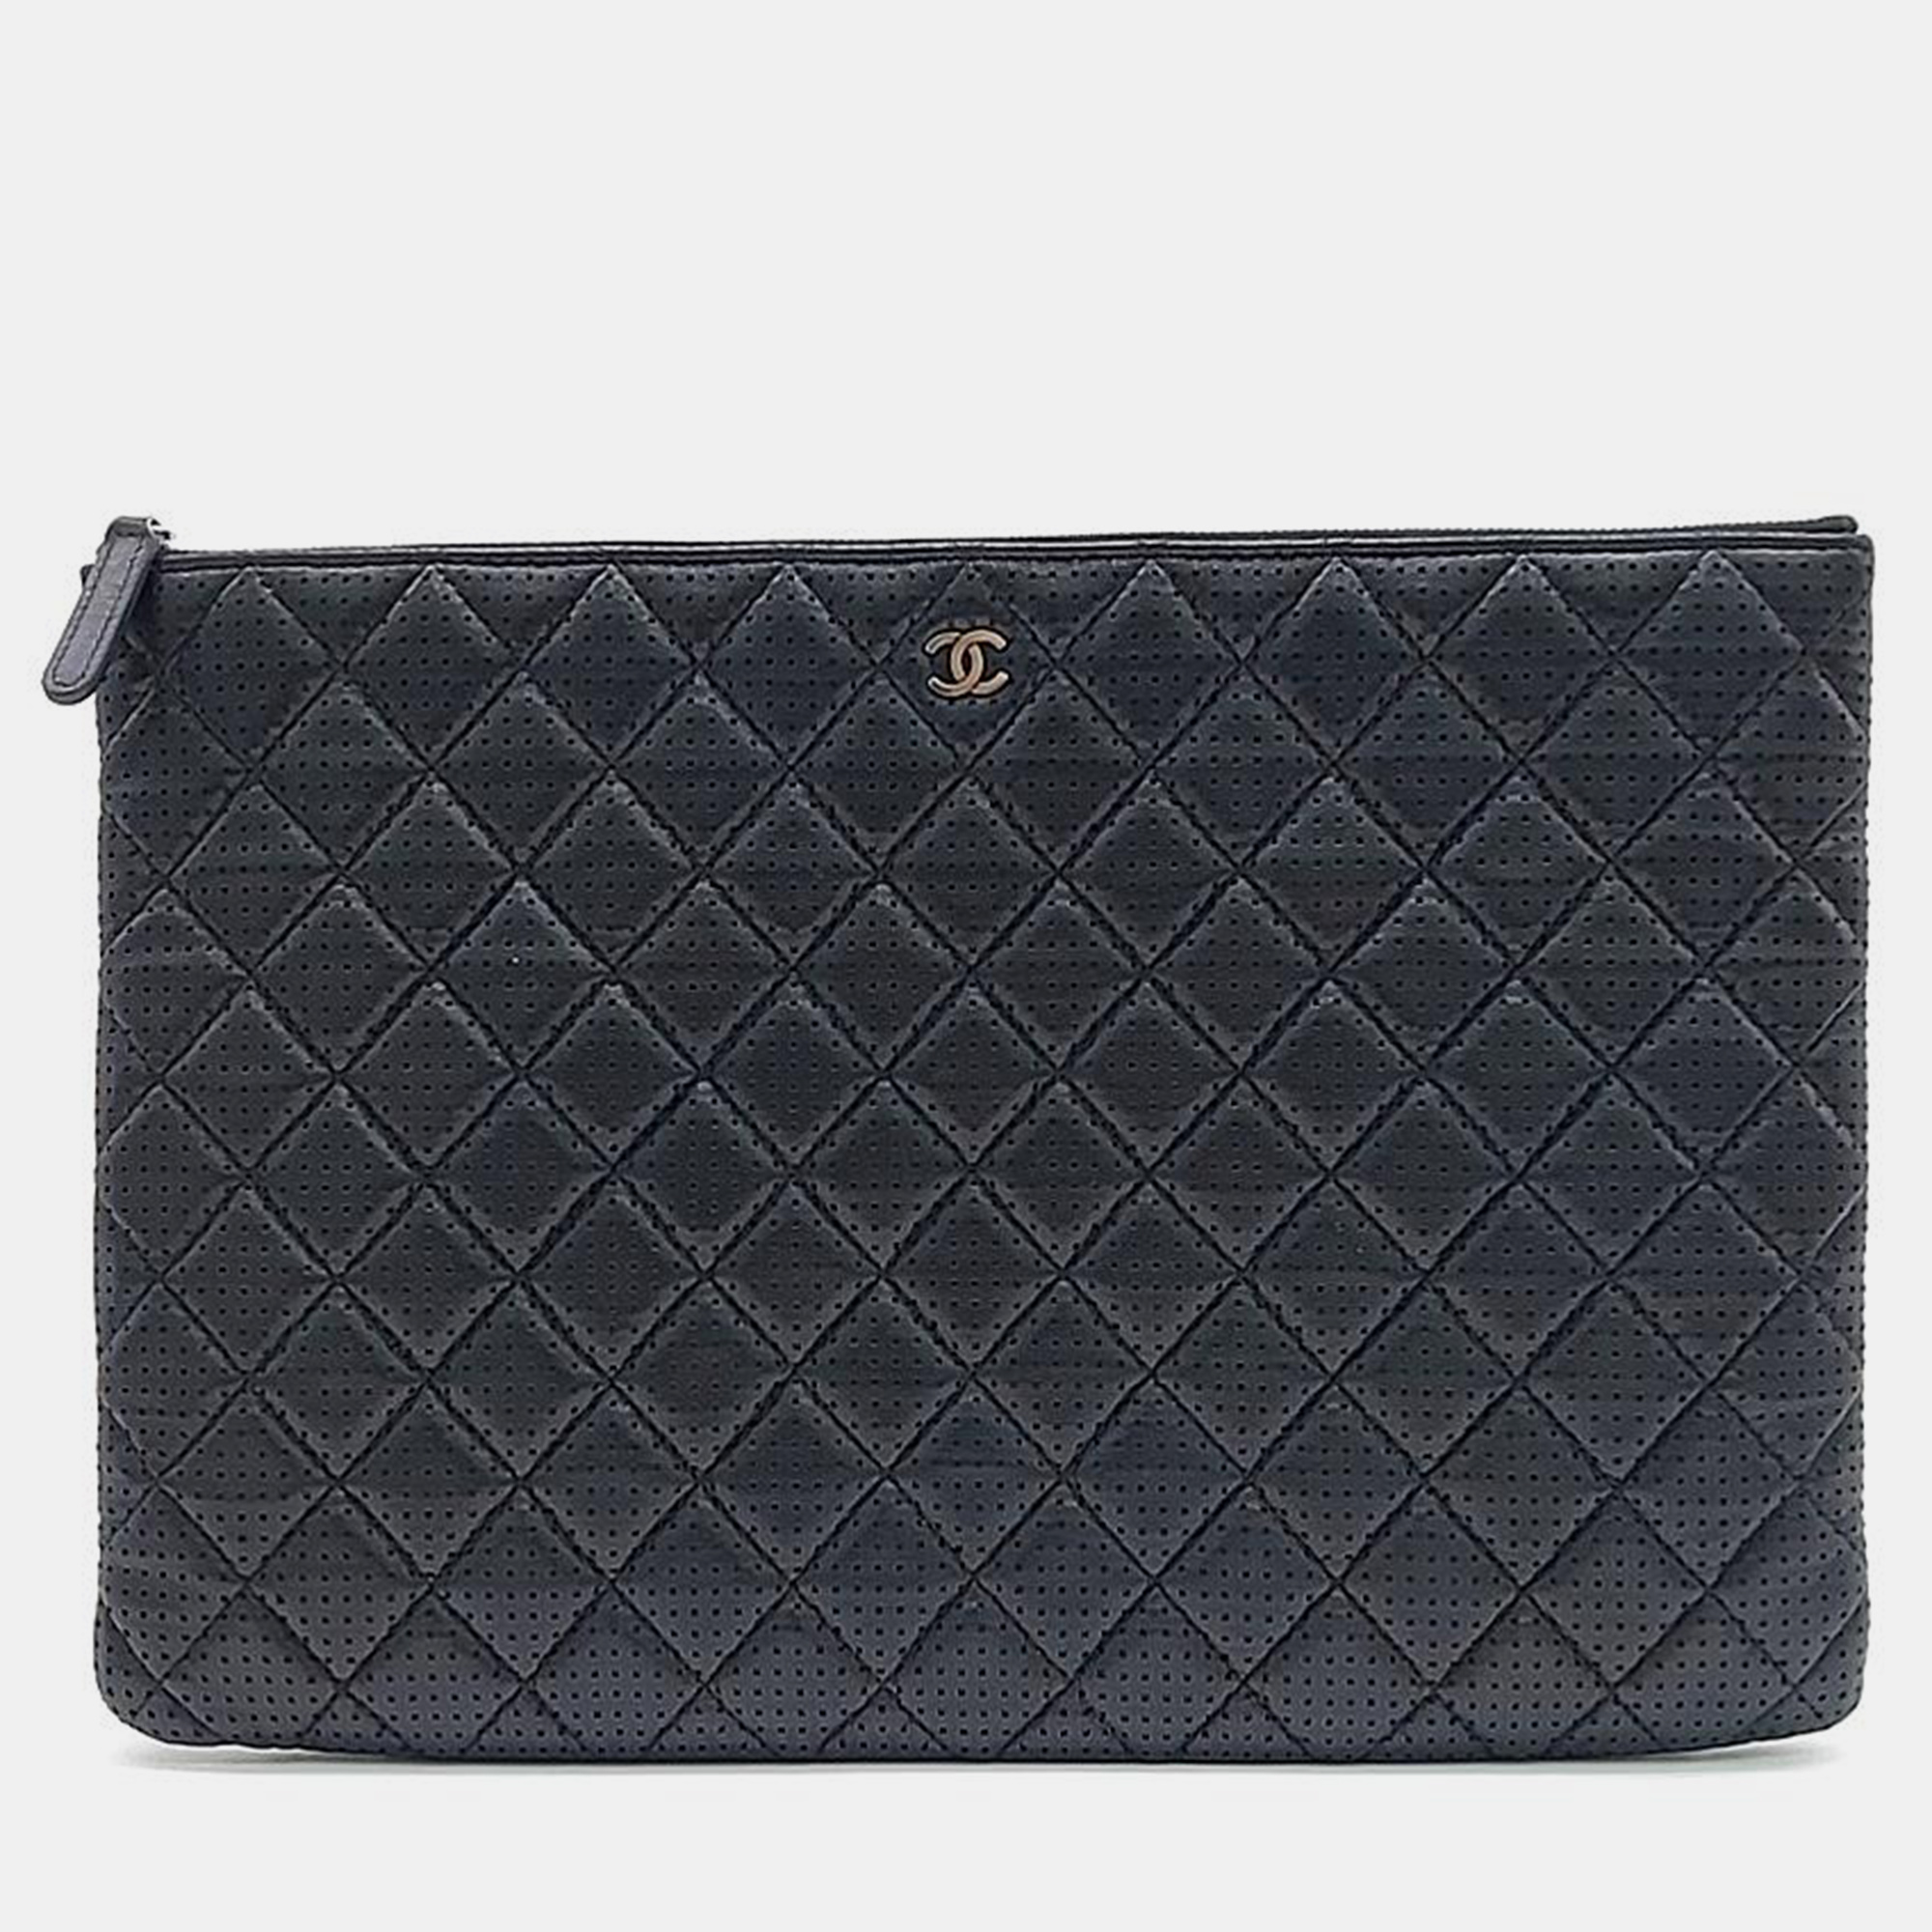 Chanel perforated large clutch